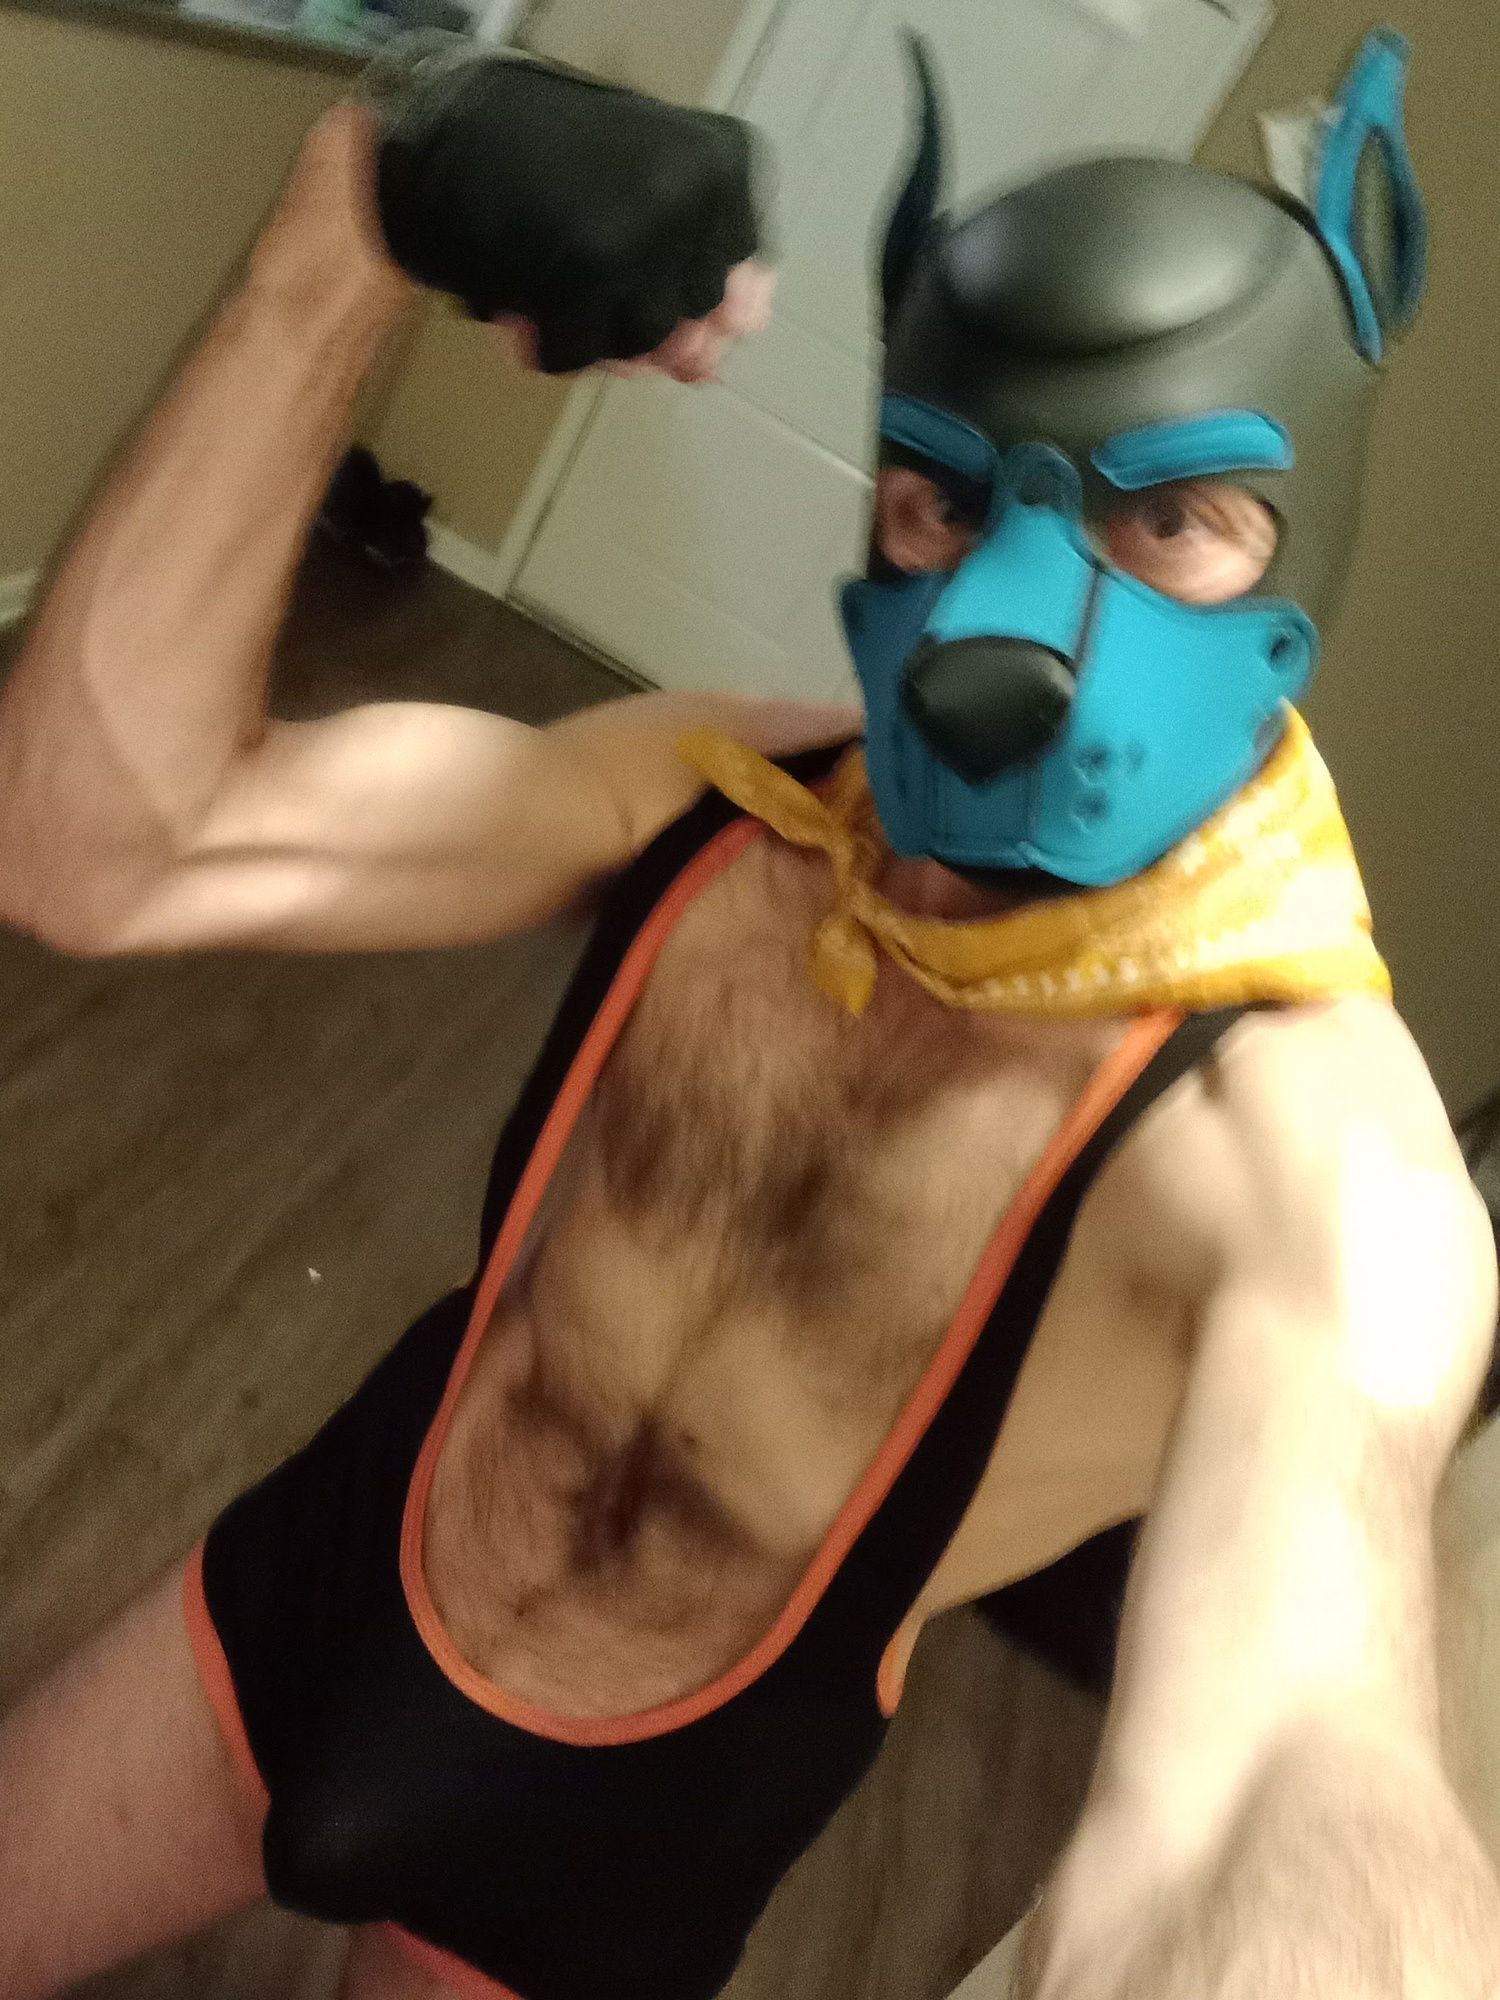 Puppers Showing off in underwear...again #28